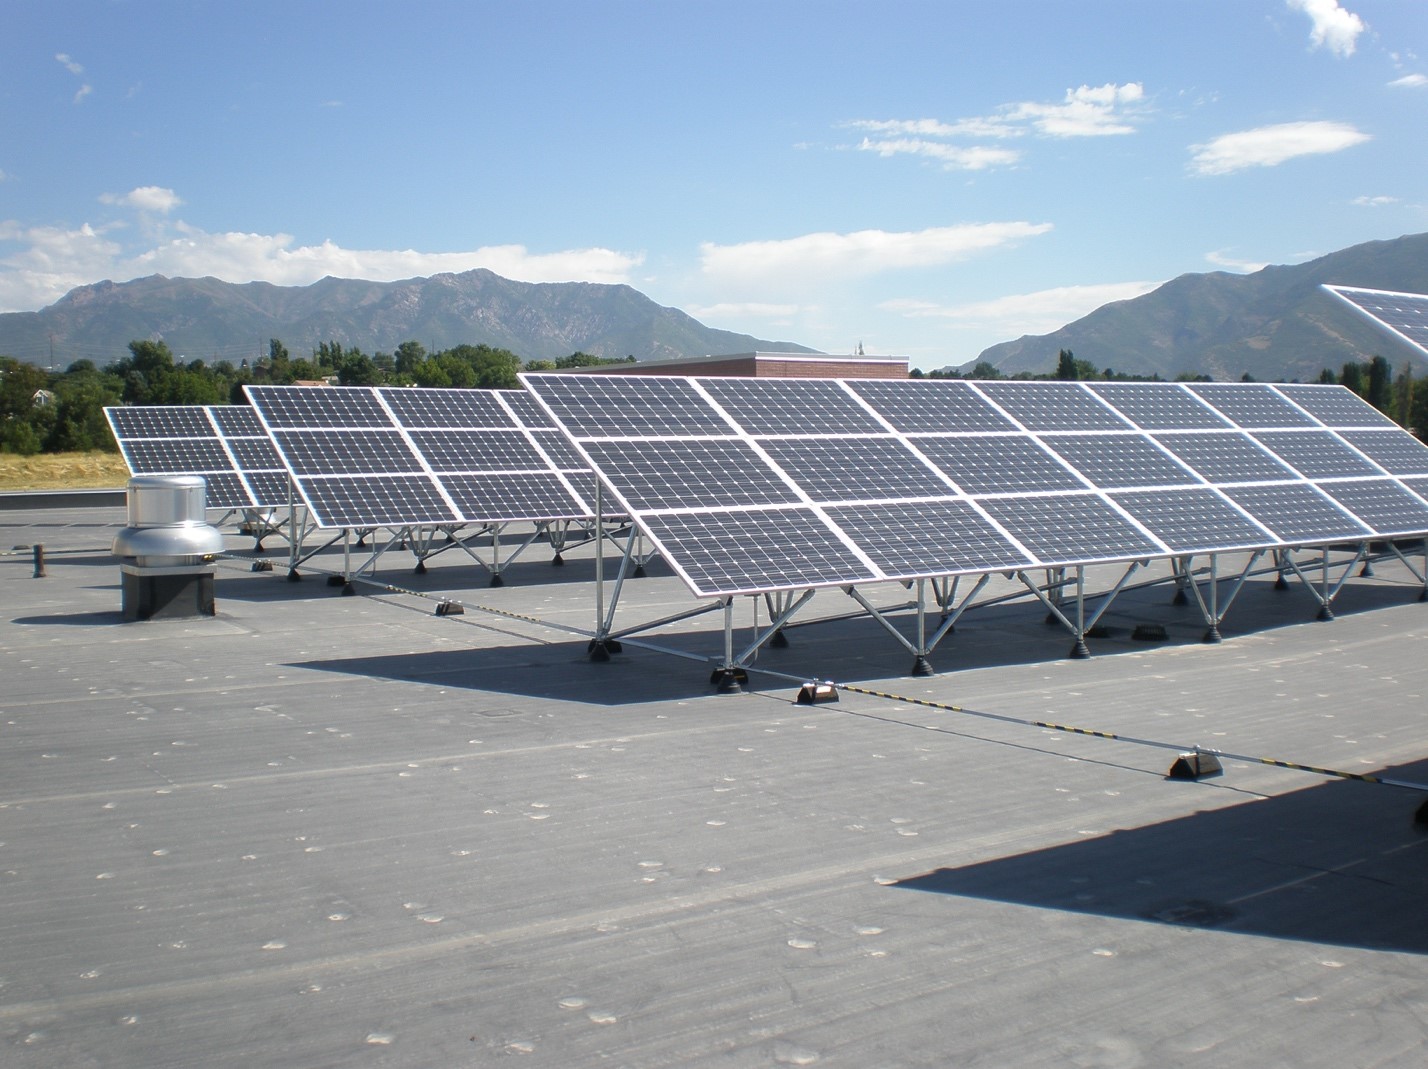 A rooftop solar installation at the Davis campus reduces the school’s reliance on fossil fuels. The university is in the process of building a 7-acre solar installation that will generate nearly two megawatts of electricity. (Photo courtesy of Weber State University)